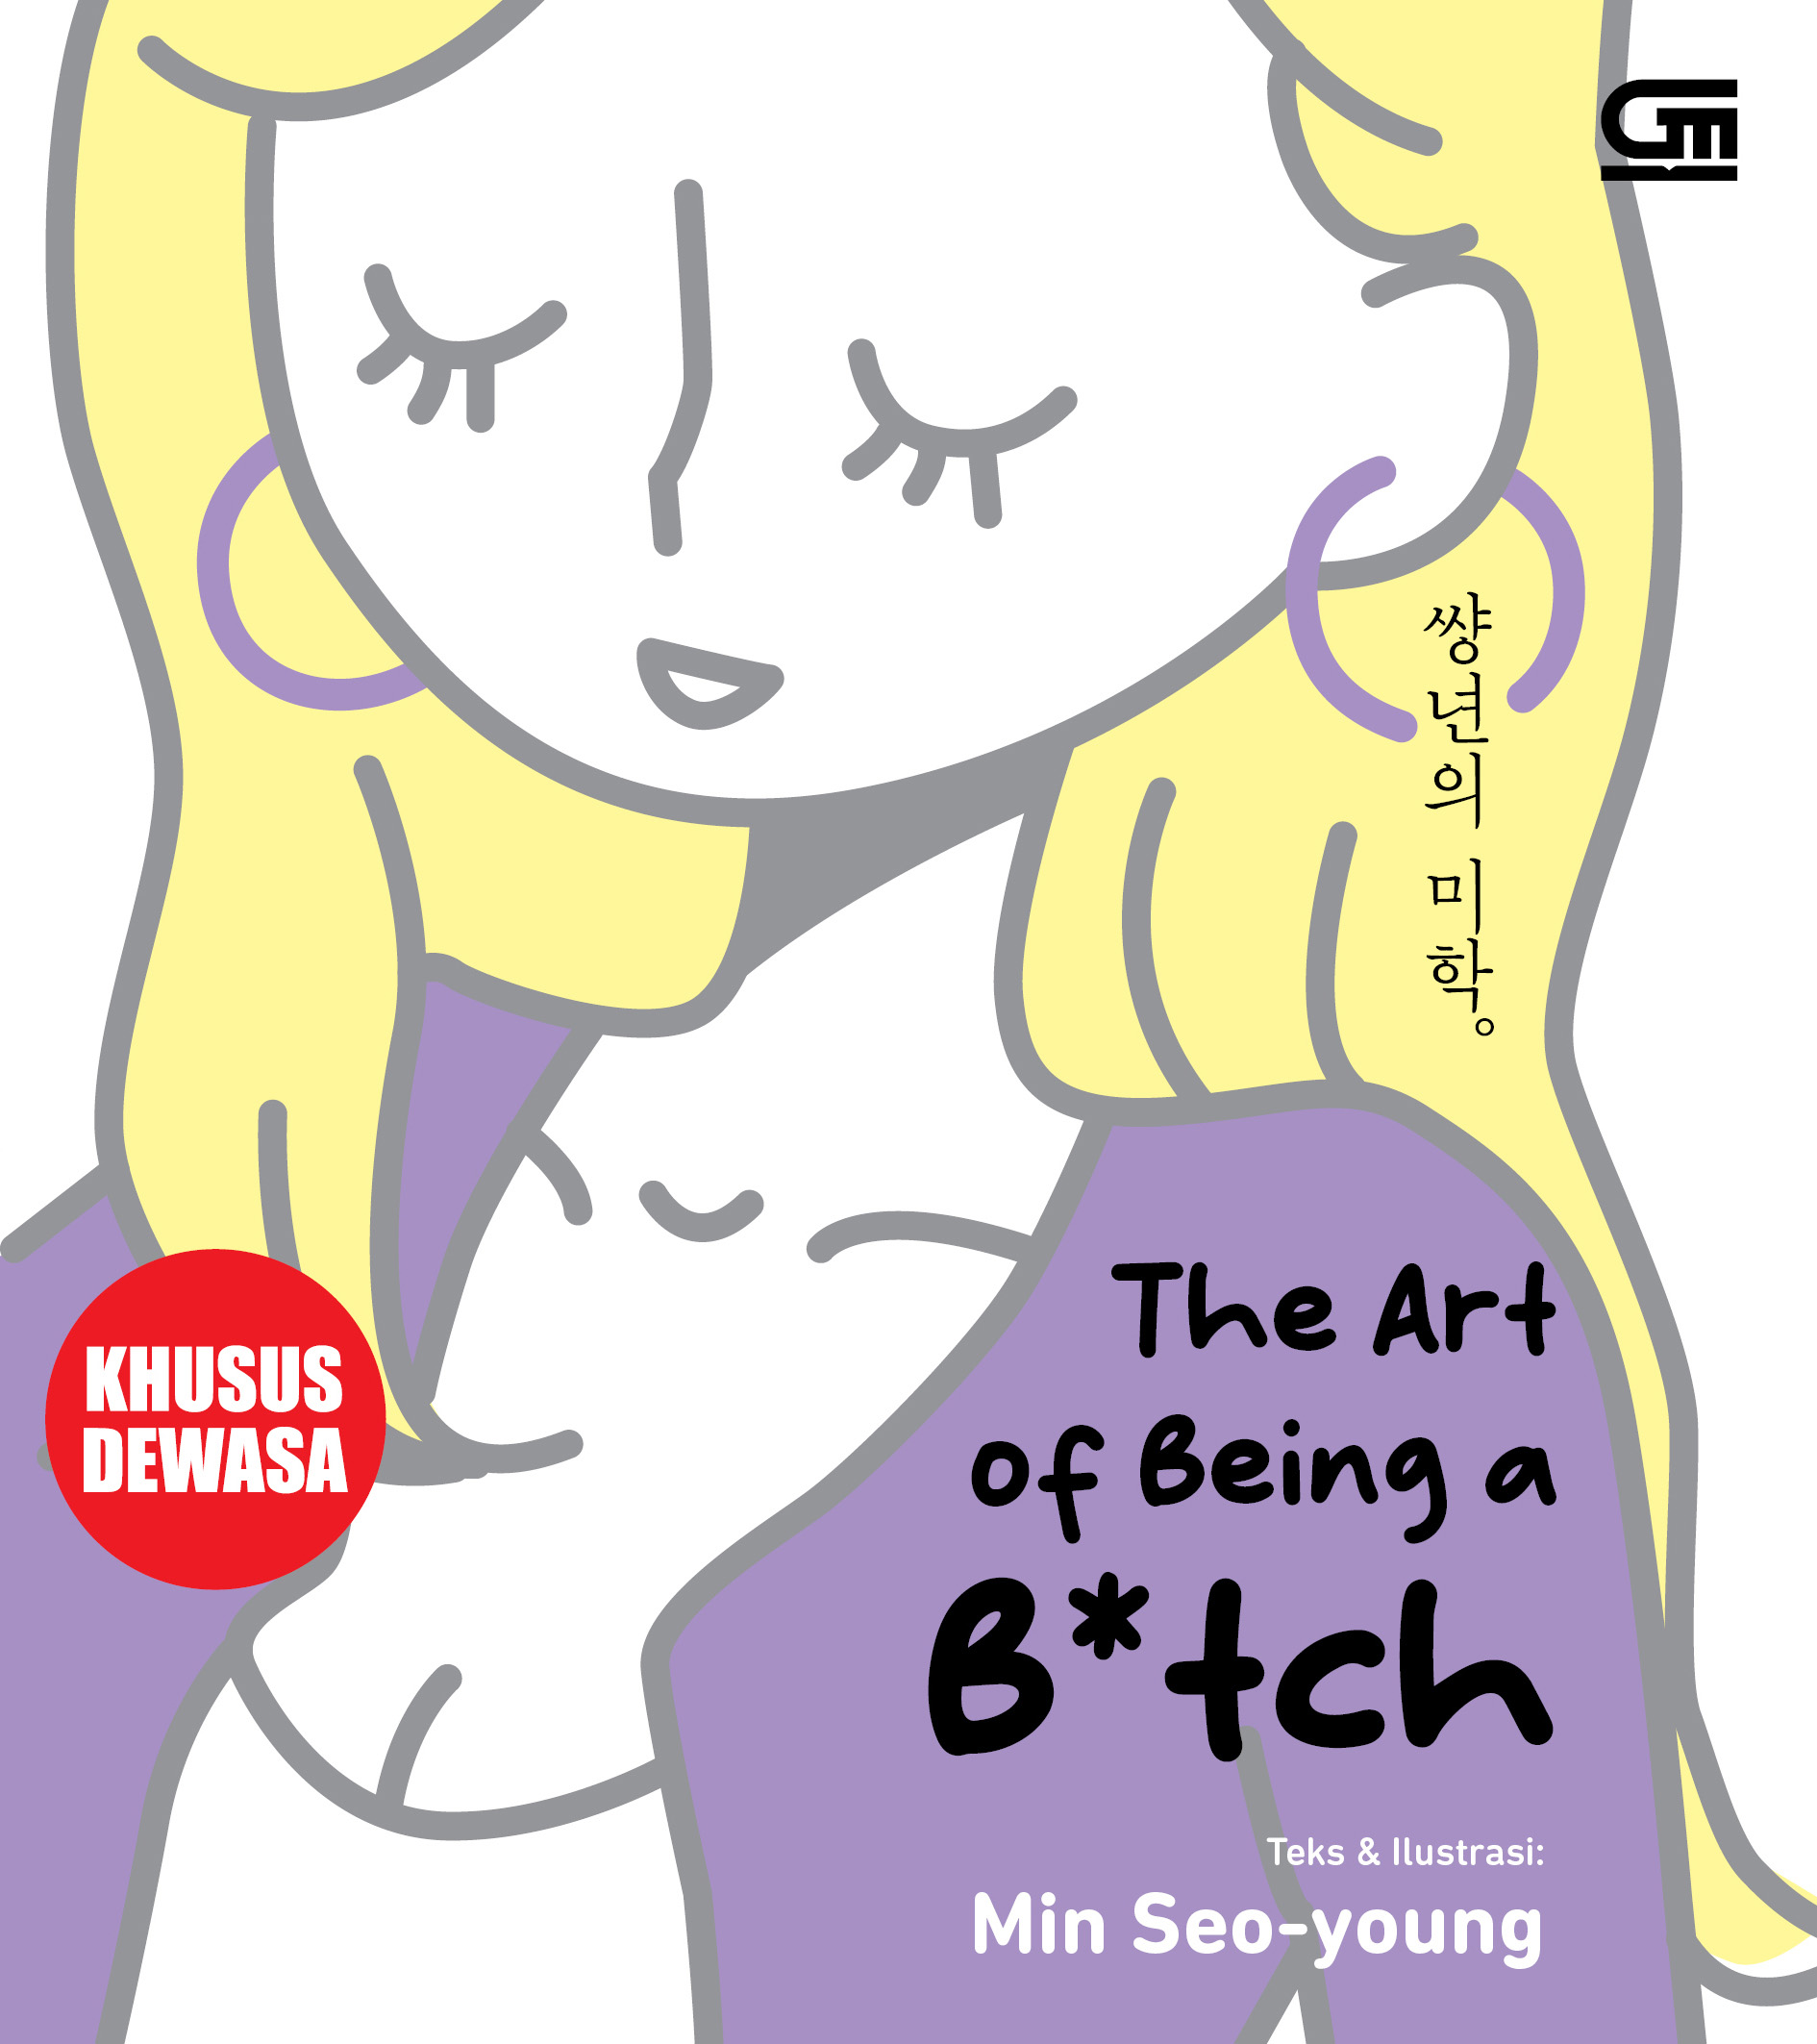 The Art of Being a B*tch